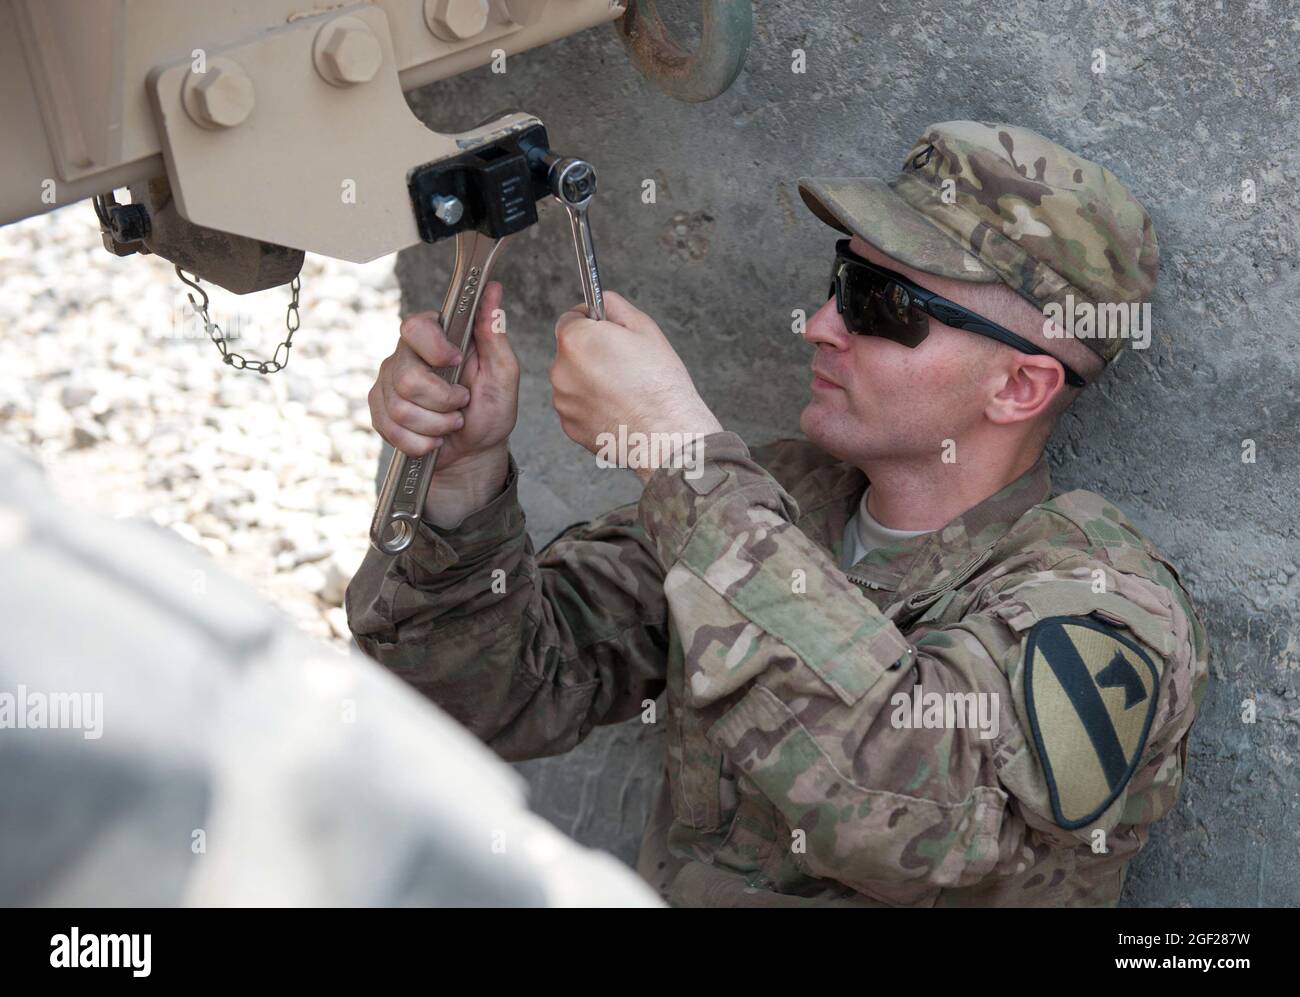 U.S. Army Pfc. Nathan Weber, of Smyrna, Del., a wheeled vehicle mechanic with Troop D, 4th Squadron, 9th Cavalry Regiment, 2nd Brigade Combat Team, 1st Cavalry Division, tightens a bolt on a truck at Forward Operating Base Fenty, Nangarhar province, Afghanistan, Sept. 11, 2013. Troop D's ongoing mission at Fenty is the maintenance, recovery and repair of everything from portable generators to vehicles disabled by roadside explosives. (U.S. Army National Guard photo by Sgt. Margaret Taylor, 129th Mobile Public Affairs Detachment/RELEASED) Stock Photo